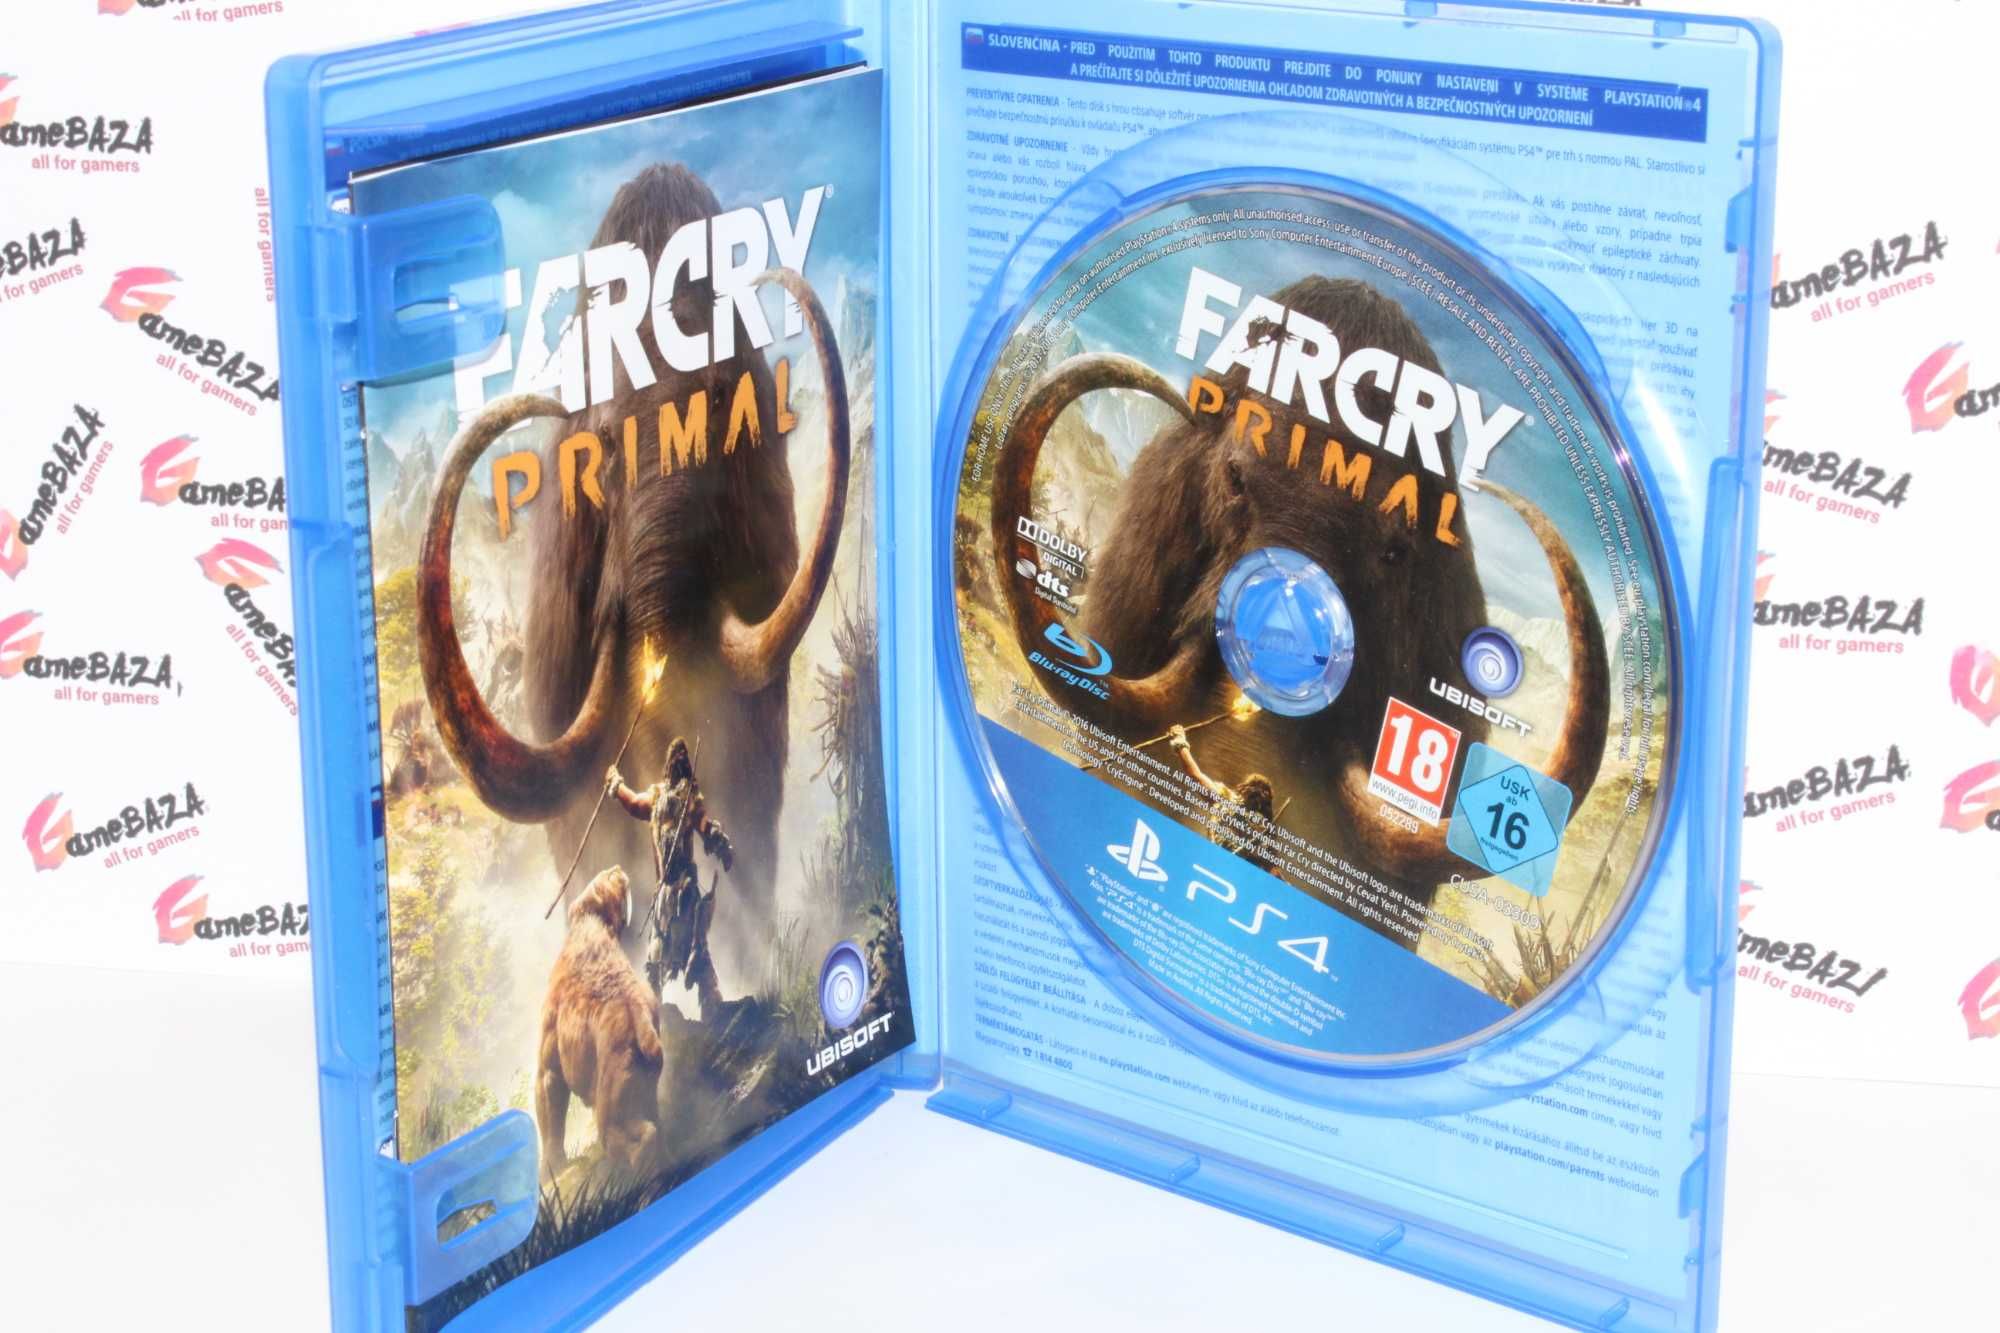 PL Far Cry Primal Special Edition Ps4 GameBAZA